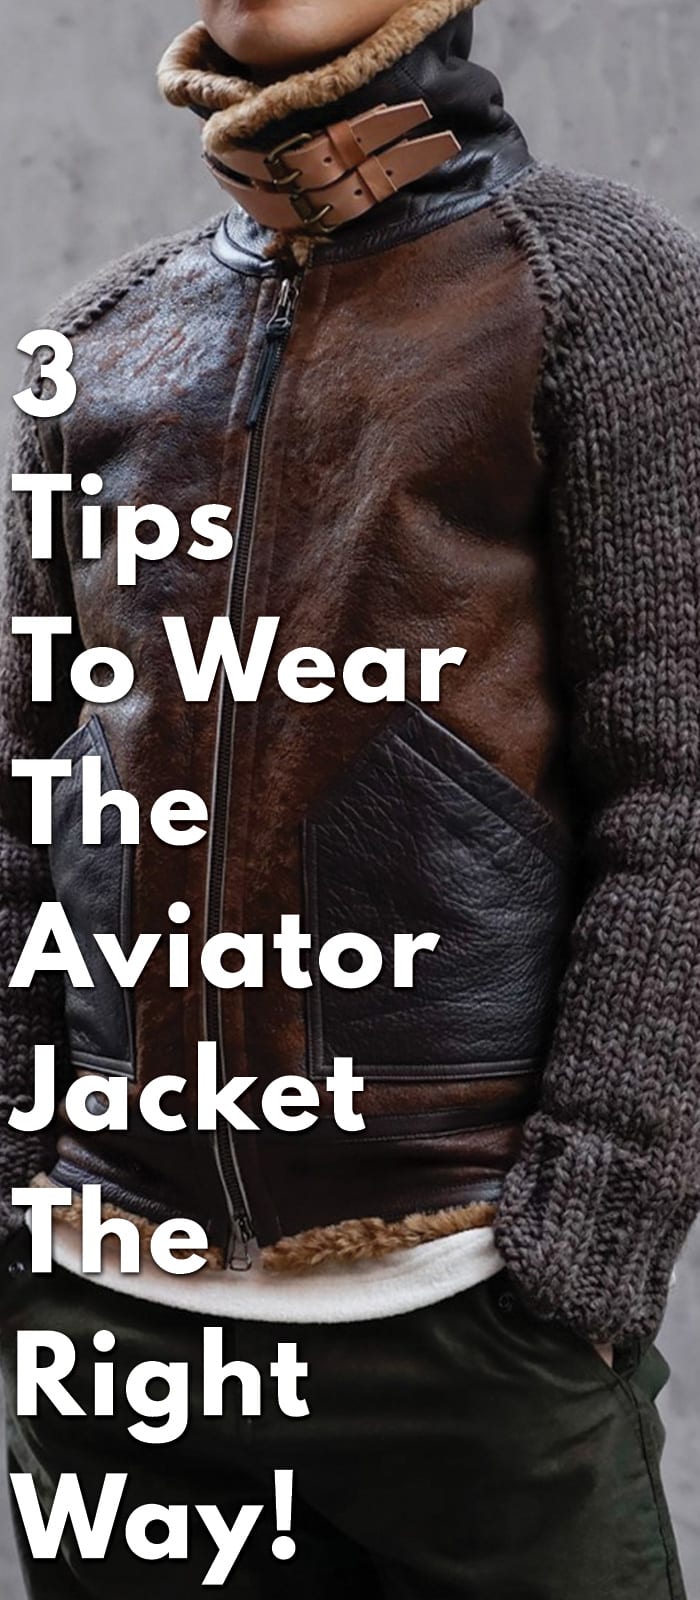 3-Tips-To-Wear-The-Aviator-Jacket-The-Right-Way!